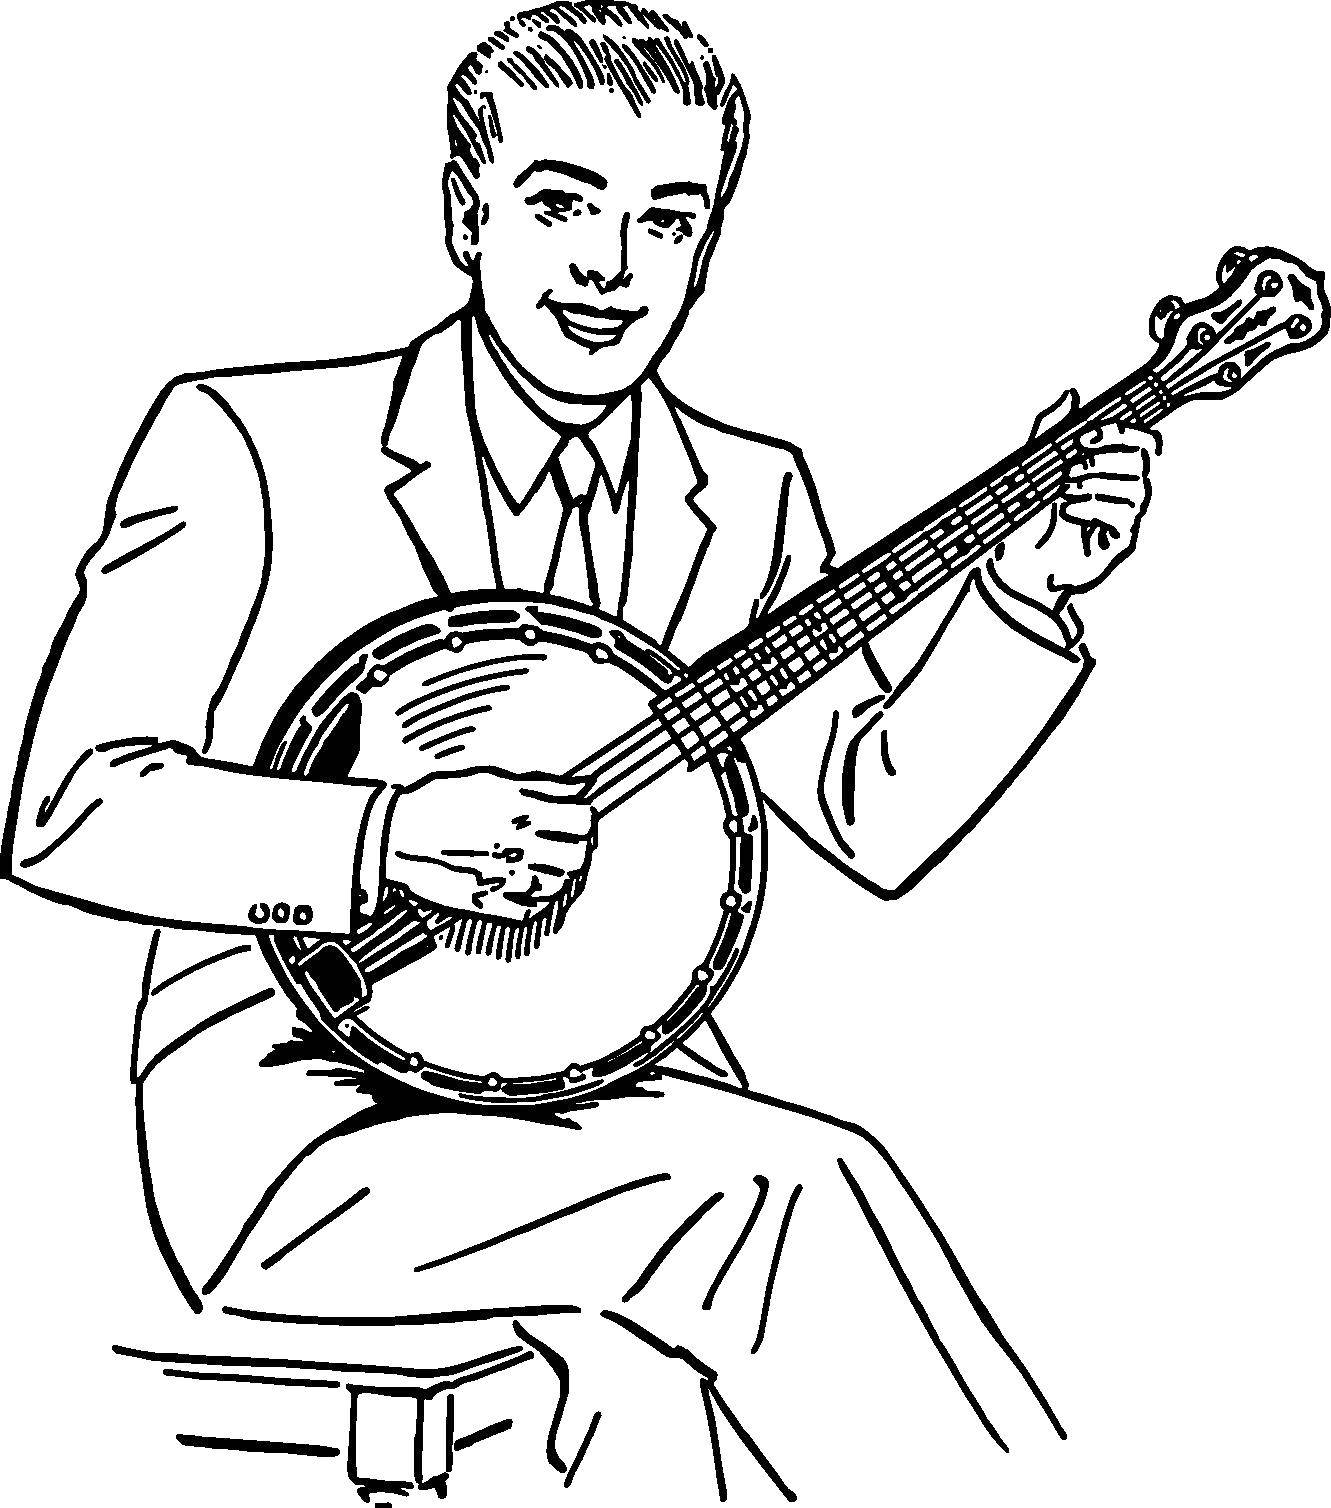 Coloring Musician. Category musical instruments . Tags:  Instrument, musician.